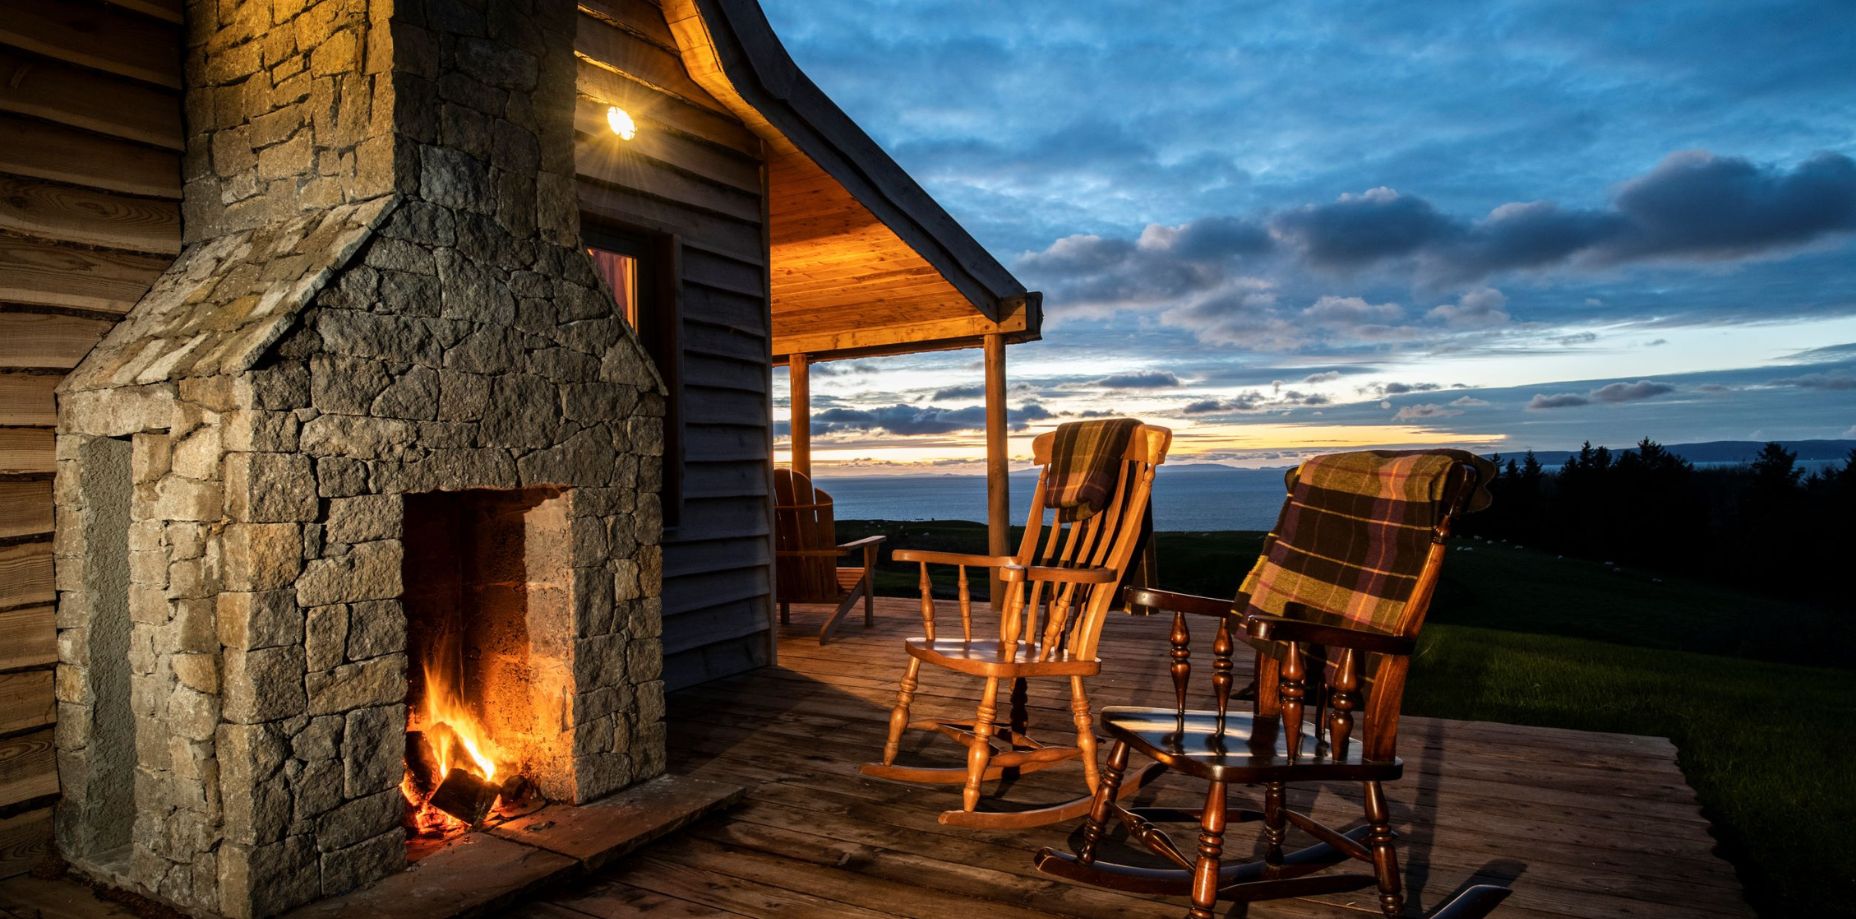 A fireplace next to a cabin with rocking chairs